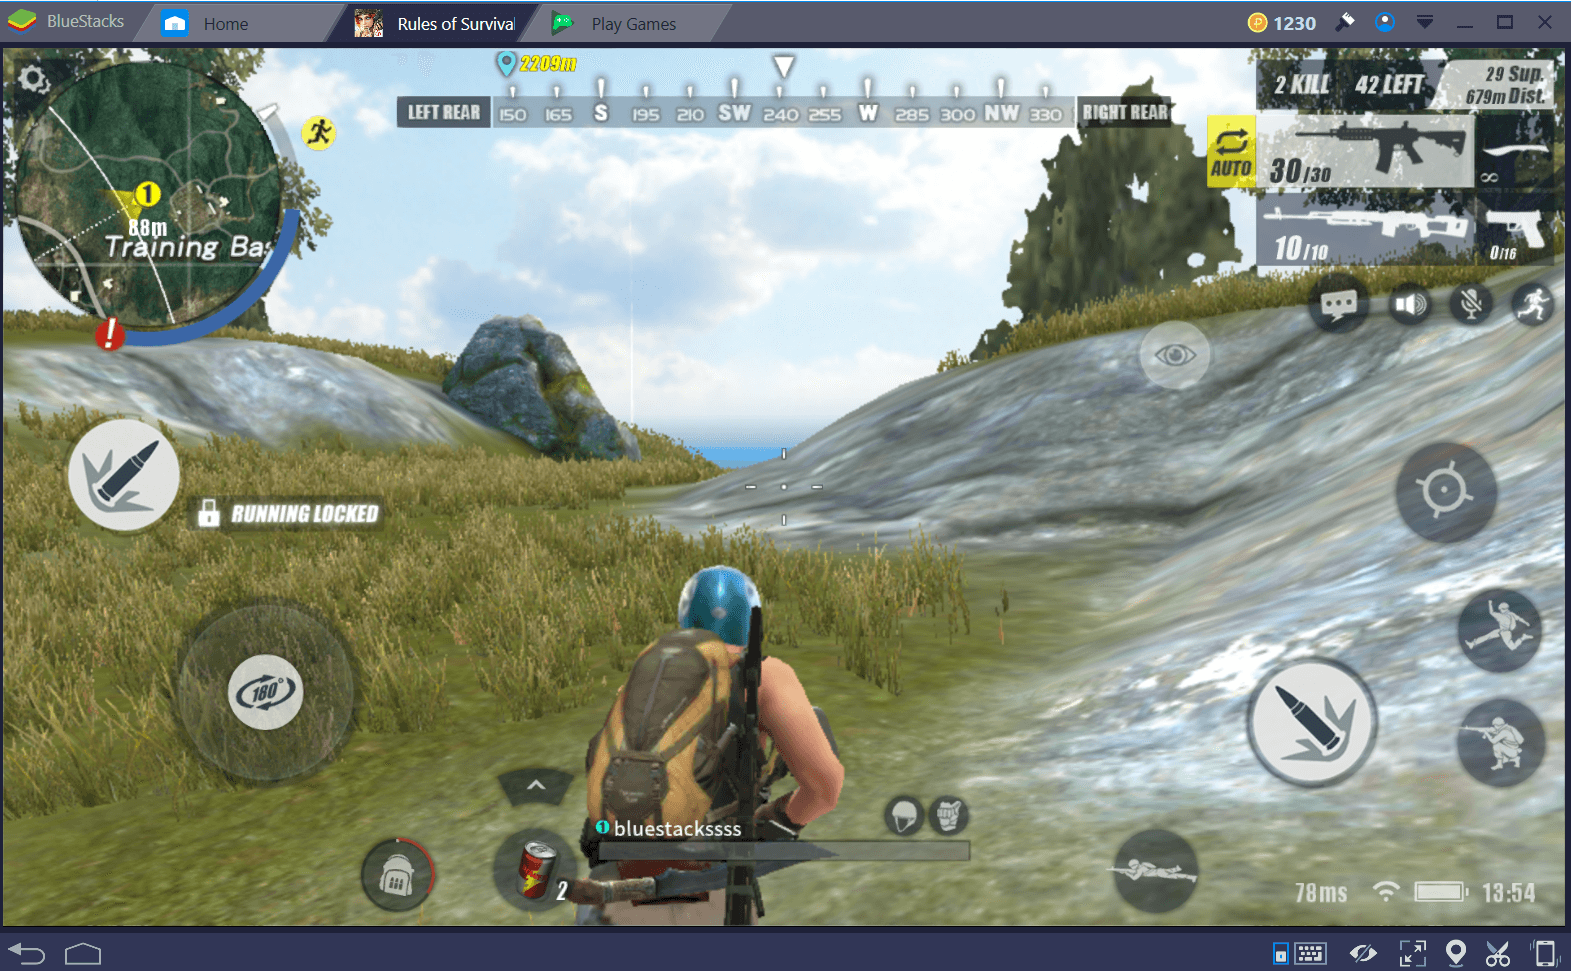 fix rules of survival opengl 4.1 english